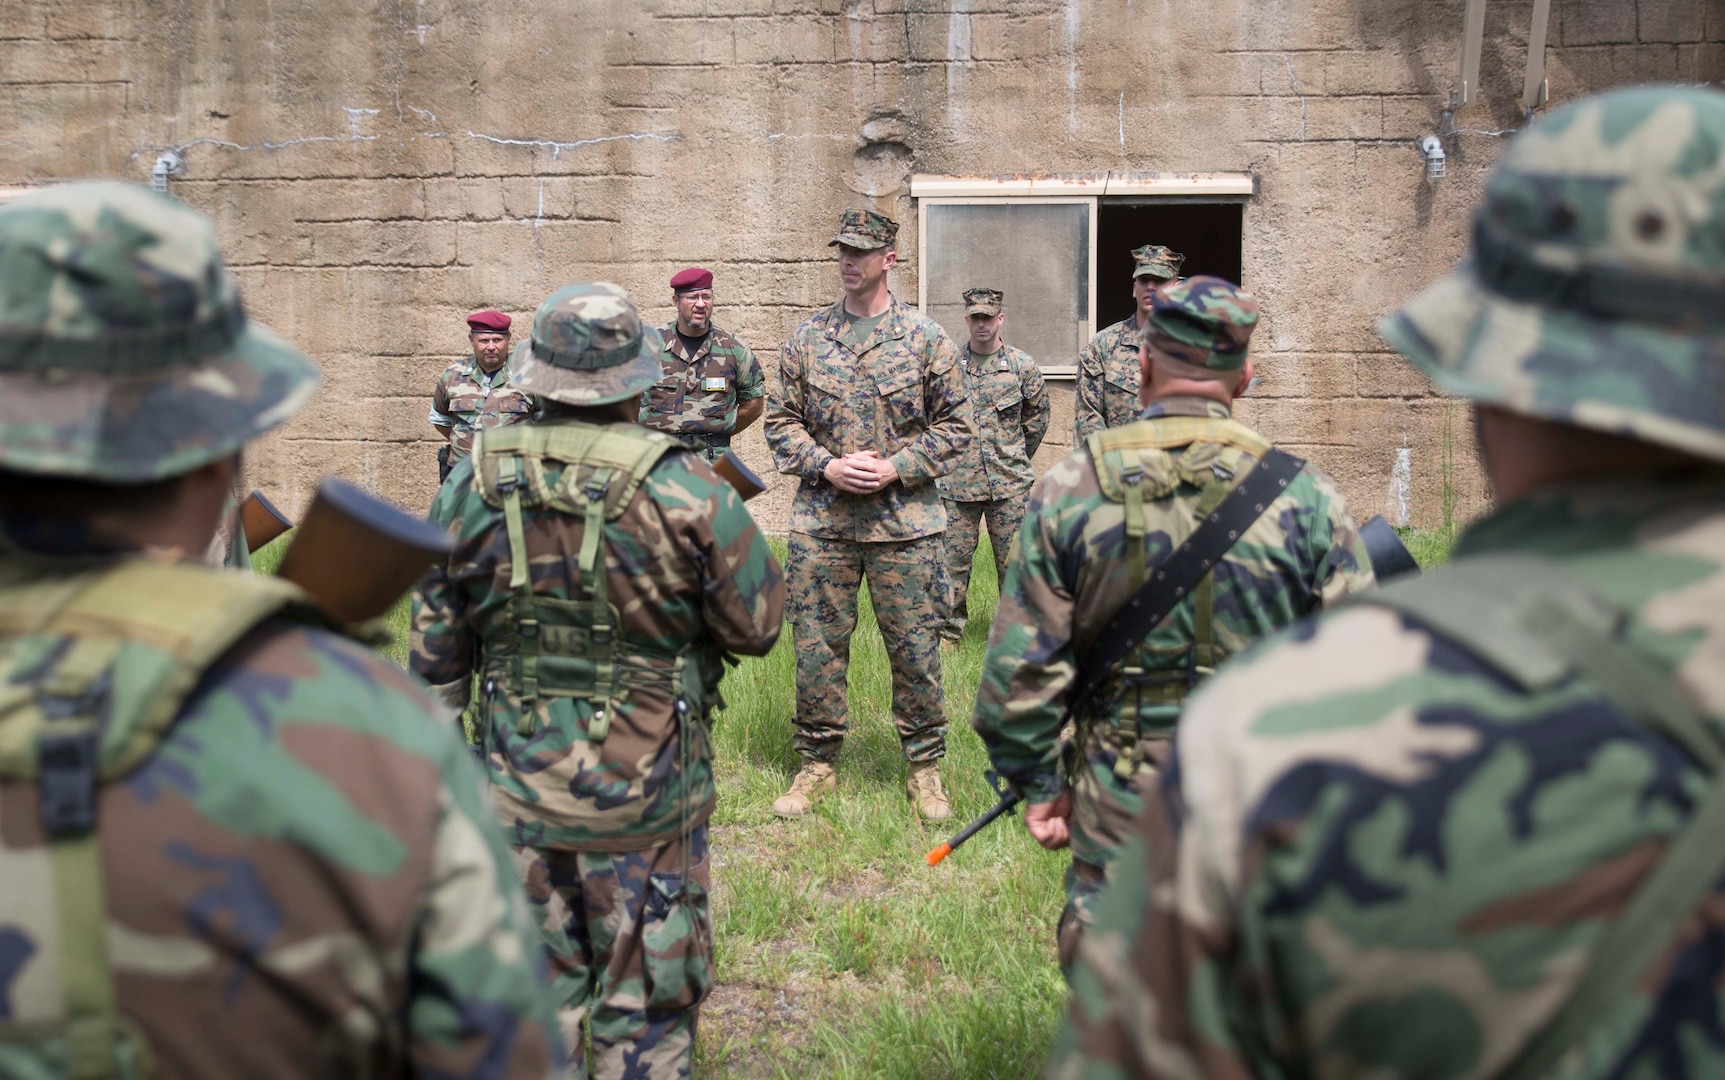 CAMP LEJEUNE, N.C. – Maj. Robert G. Gill speaks to role players at a simulated graduation ceremony during General Exercise 2 at Marine Corps Base Camp Lejeune, North Carolina, May 4, 2017. The Marines conducted the final rehearsal exercise of the Marine Advisor Course in order to assess their readiness to train foreign security forces during their upcoming deployment to Central America. Gill is the officer in charge of the Ground Combat Element, Special Purpose Marine Air-Ground Task Force - Southern Command. The Marine Advisor Course is taught by the Marine Corps Security Cooperation Group. (U.S. Marine Corps photo by Sgt. Ian Leones)